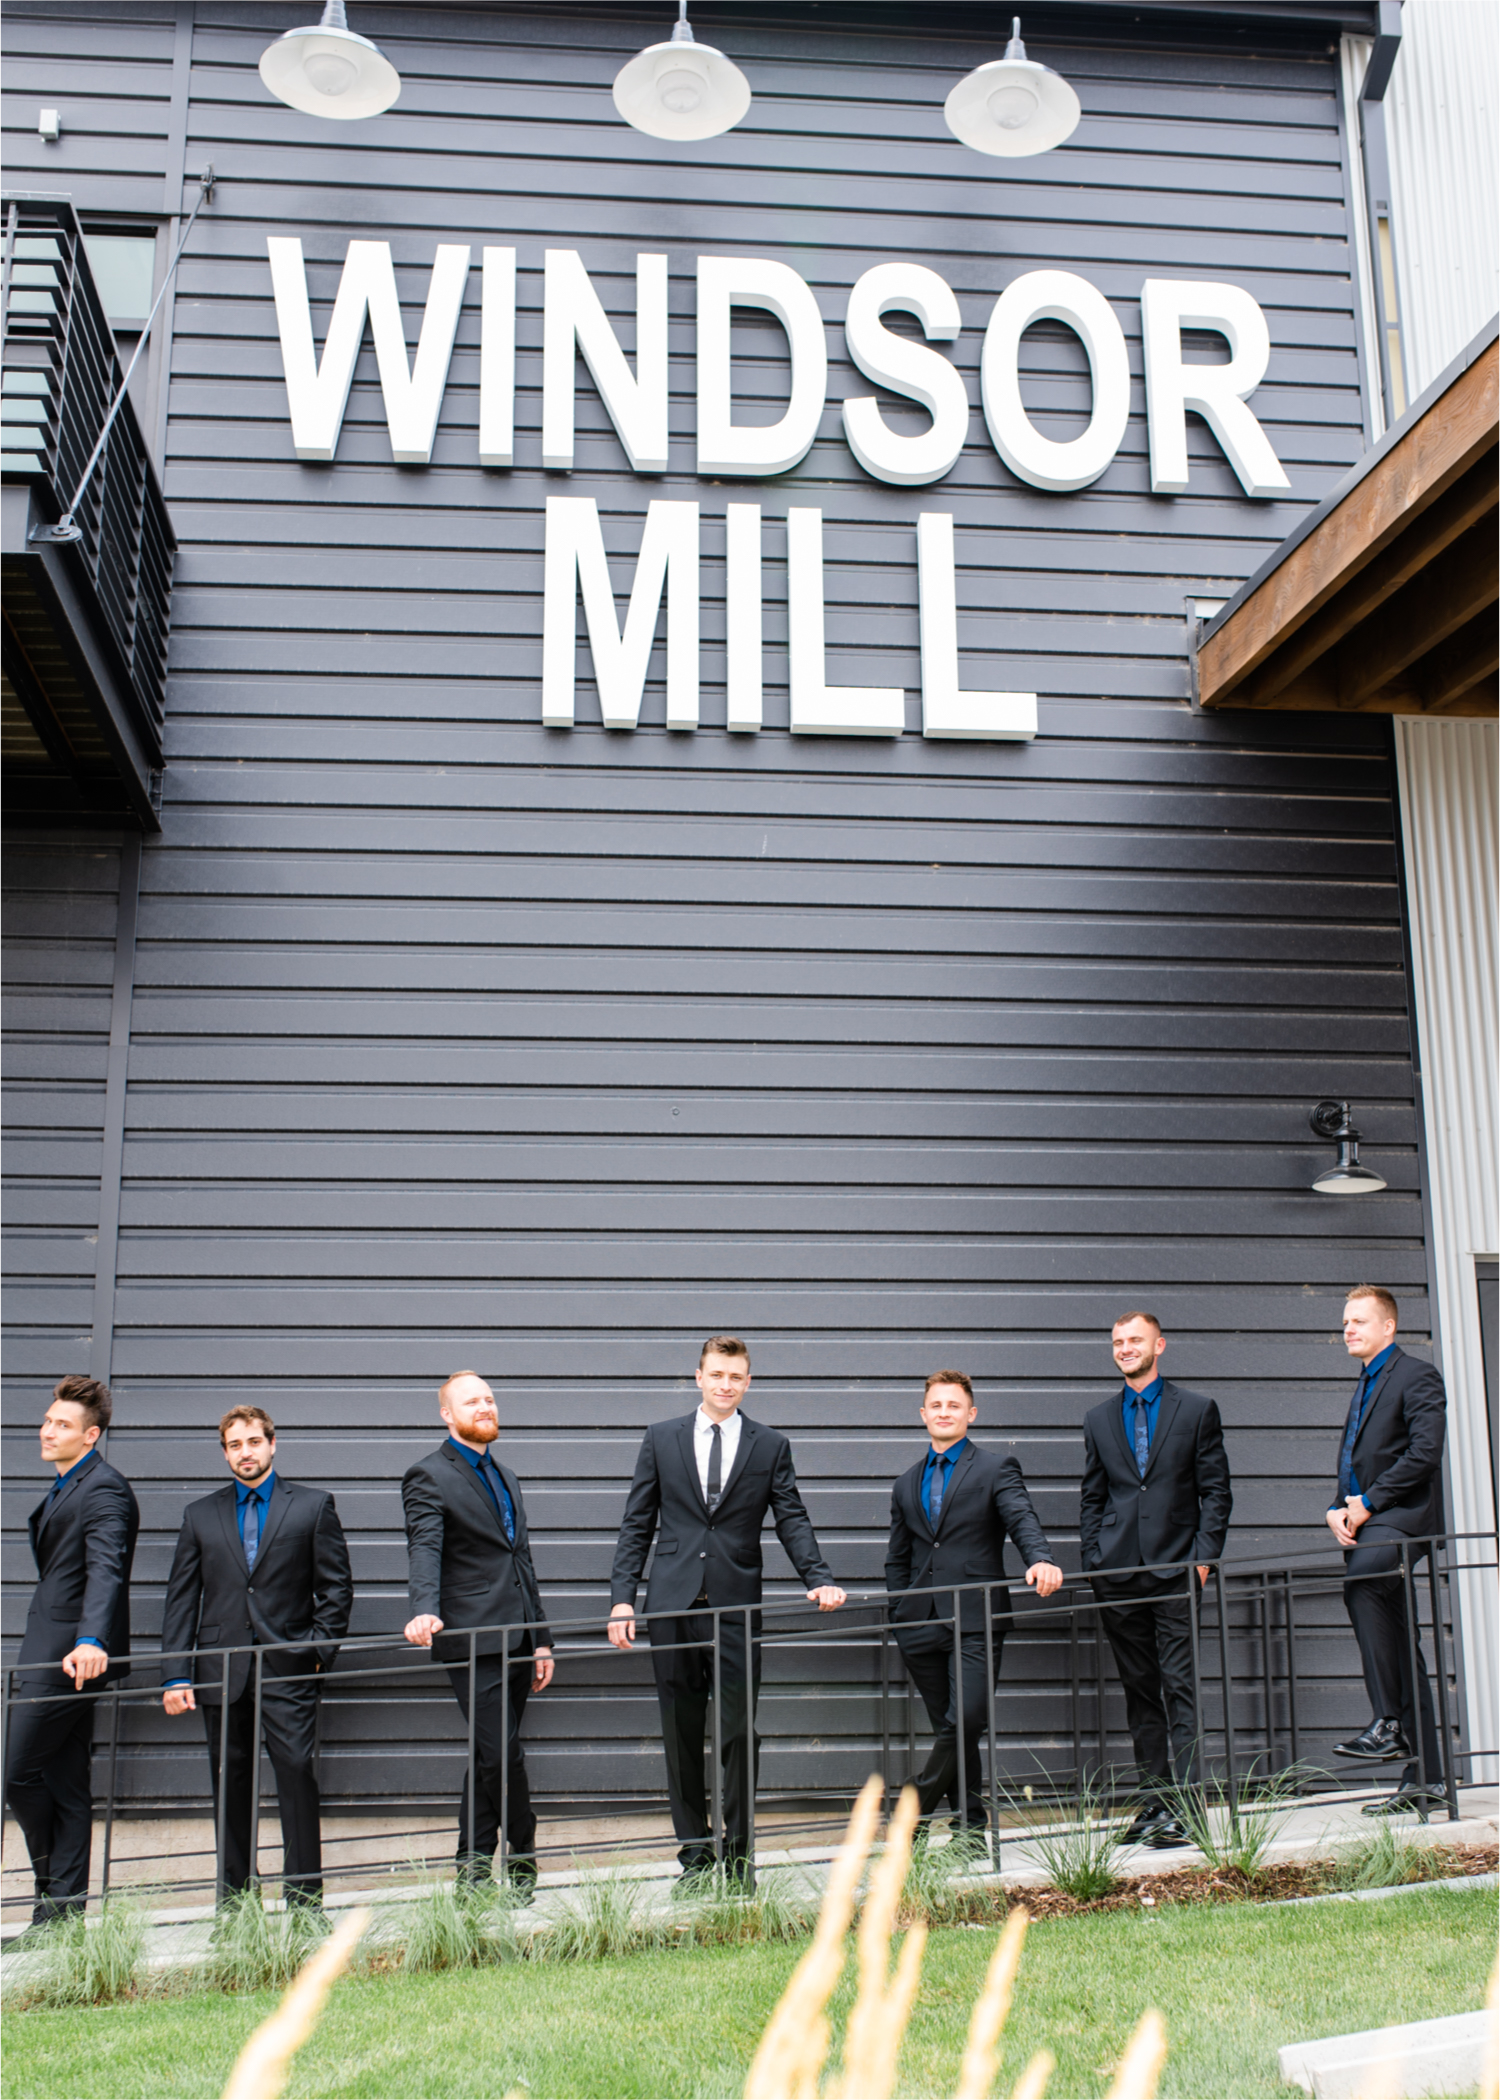 Romantic and Rustic Wedding at The Mill in Windsor | Britni Girard Photography | Colorado based wedding photography and videography team | Groomsmen outside The Windsor Mill | Royal Blue and White Wedding | Groomsmen attire from Express